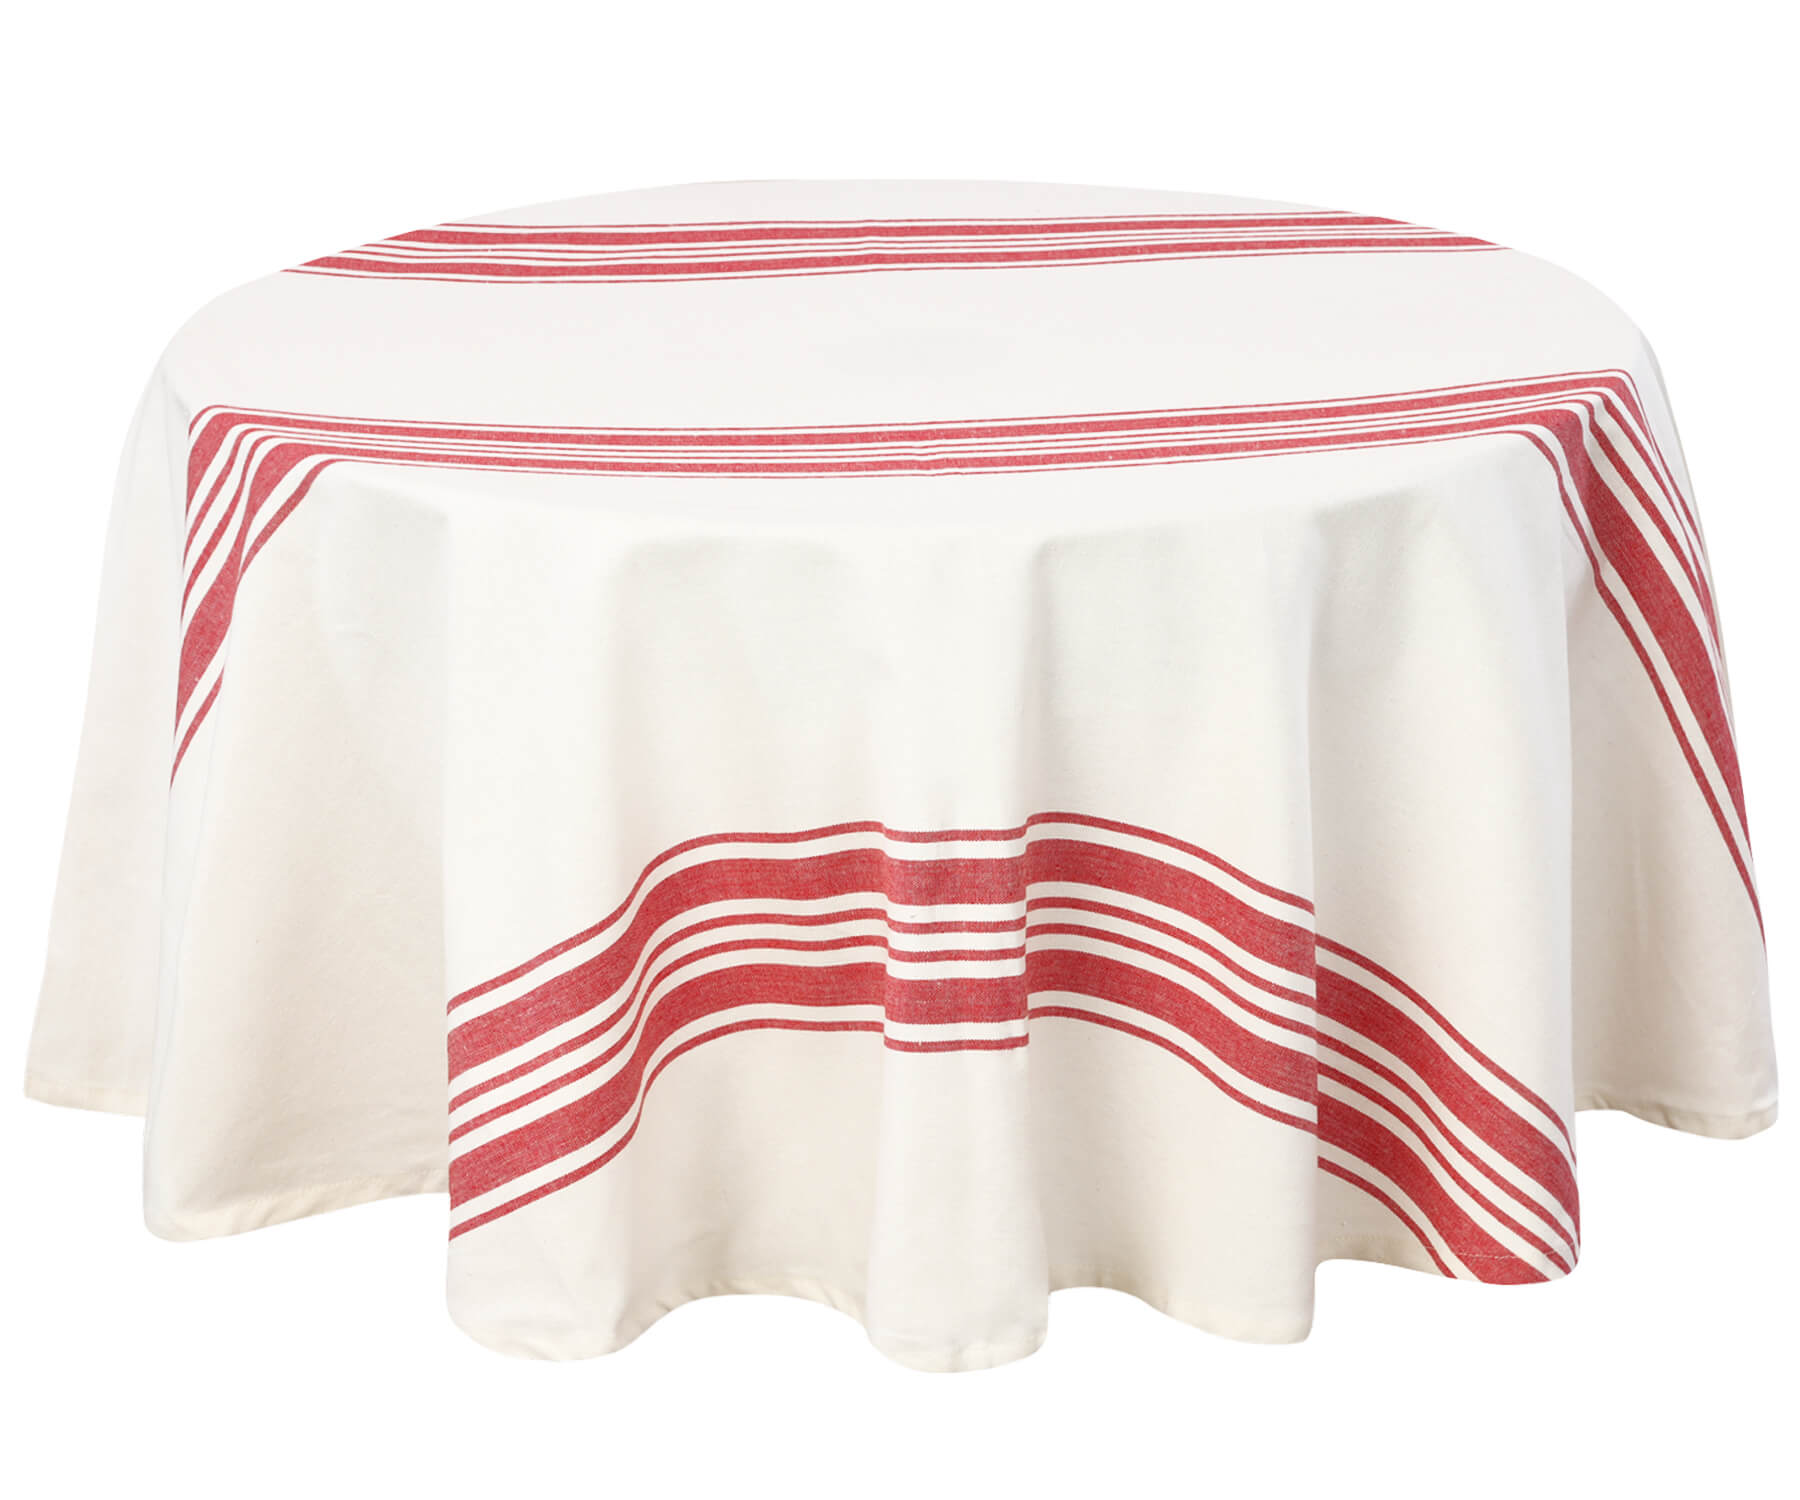 Round outdoor tablecloth exhibiting red stripes